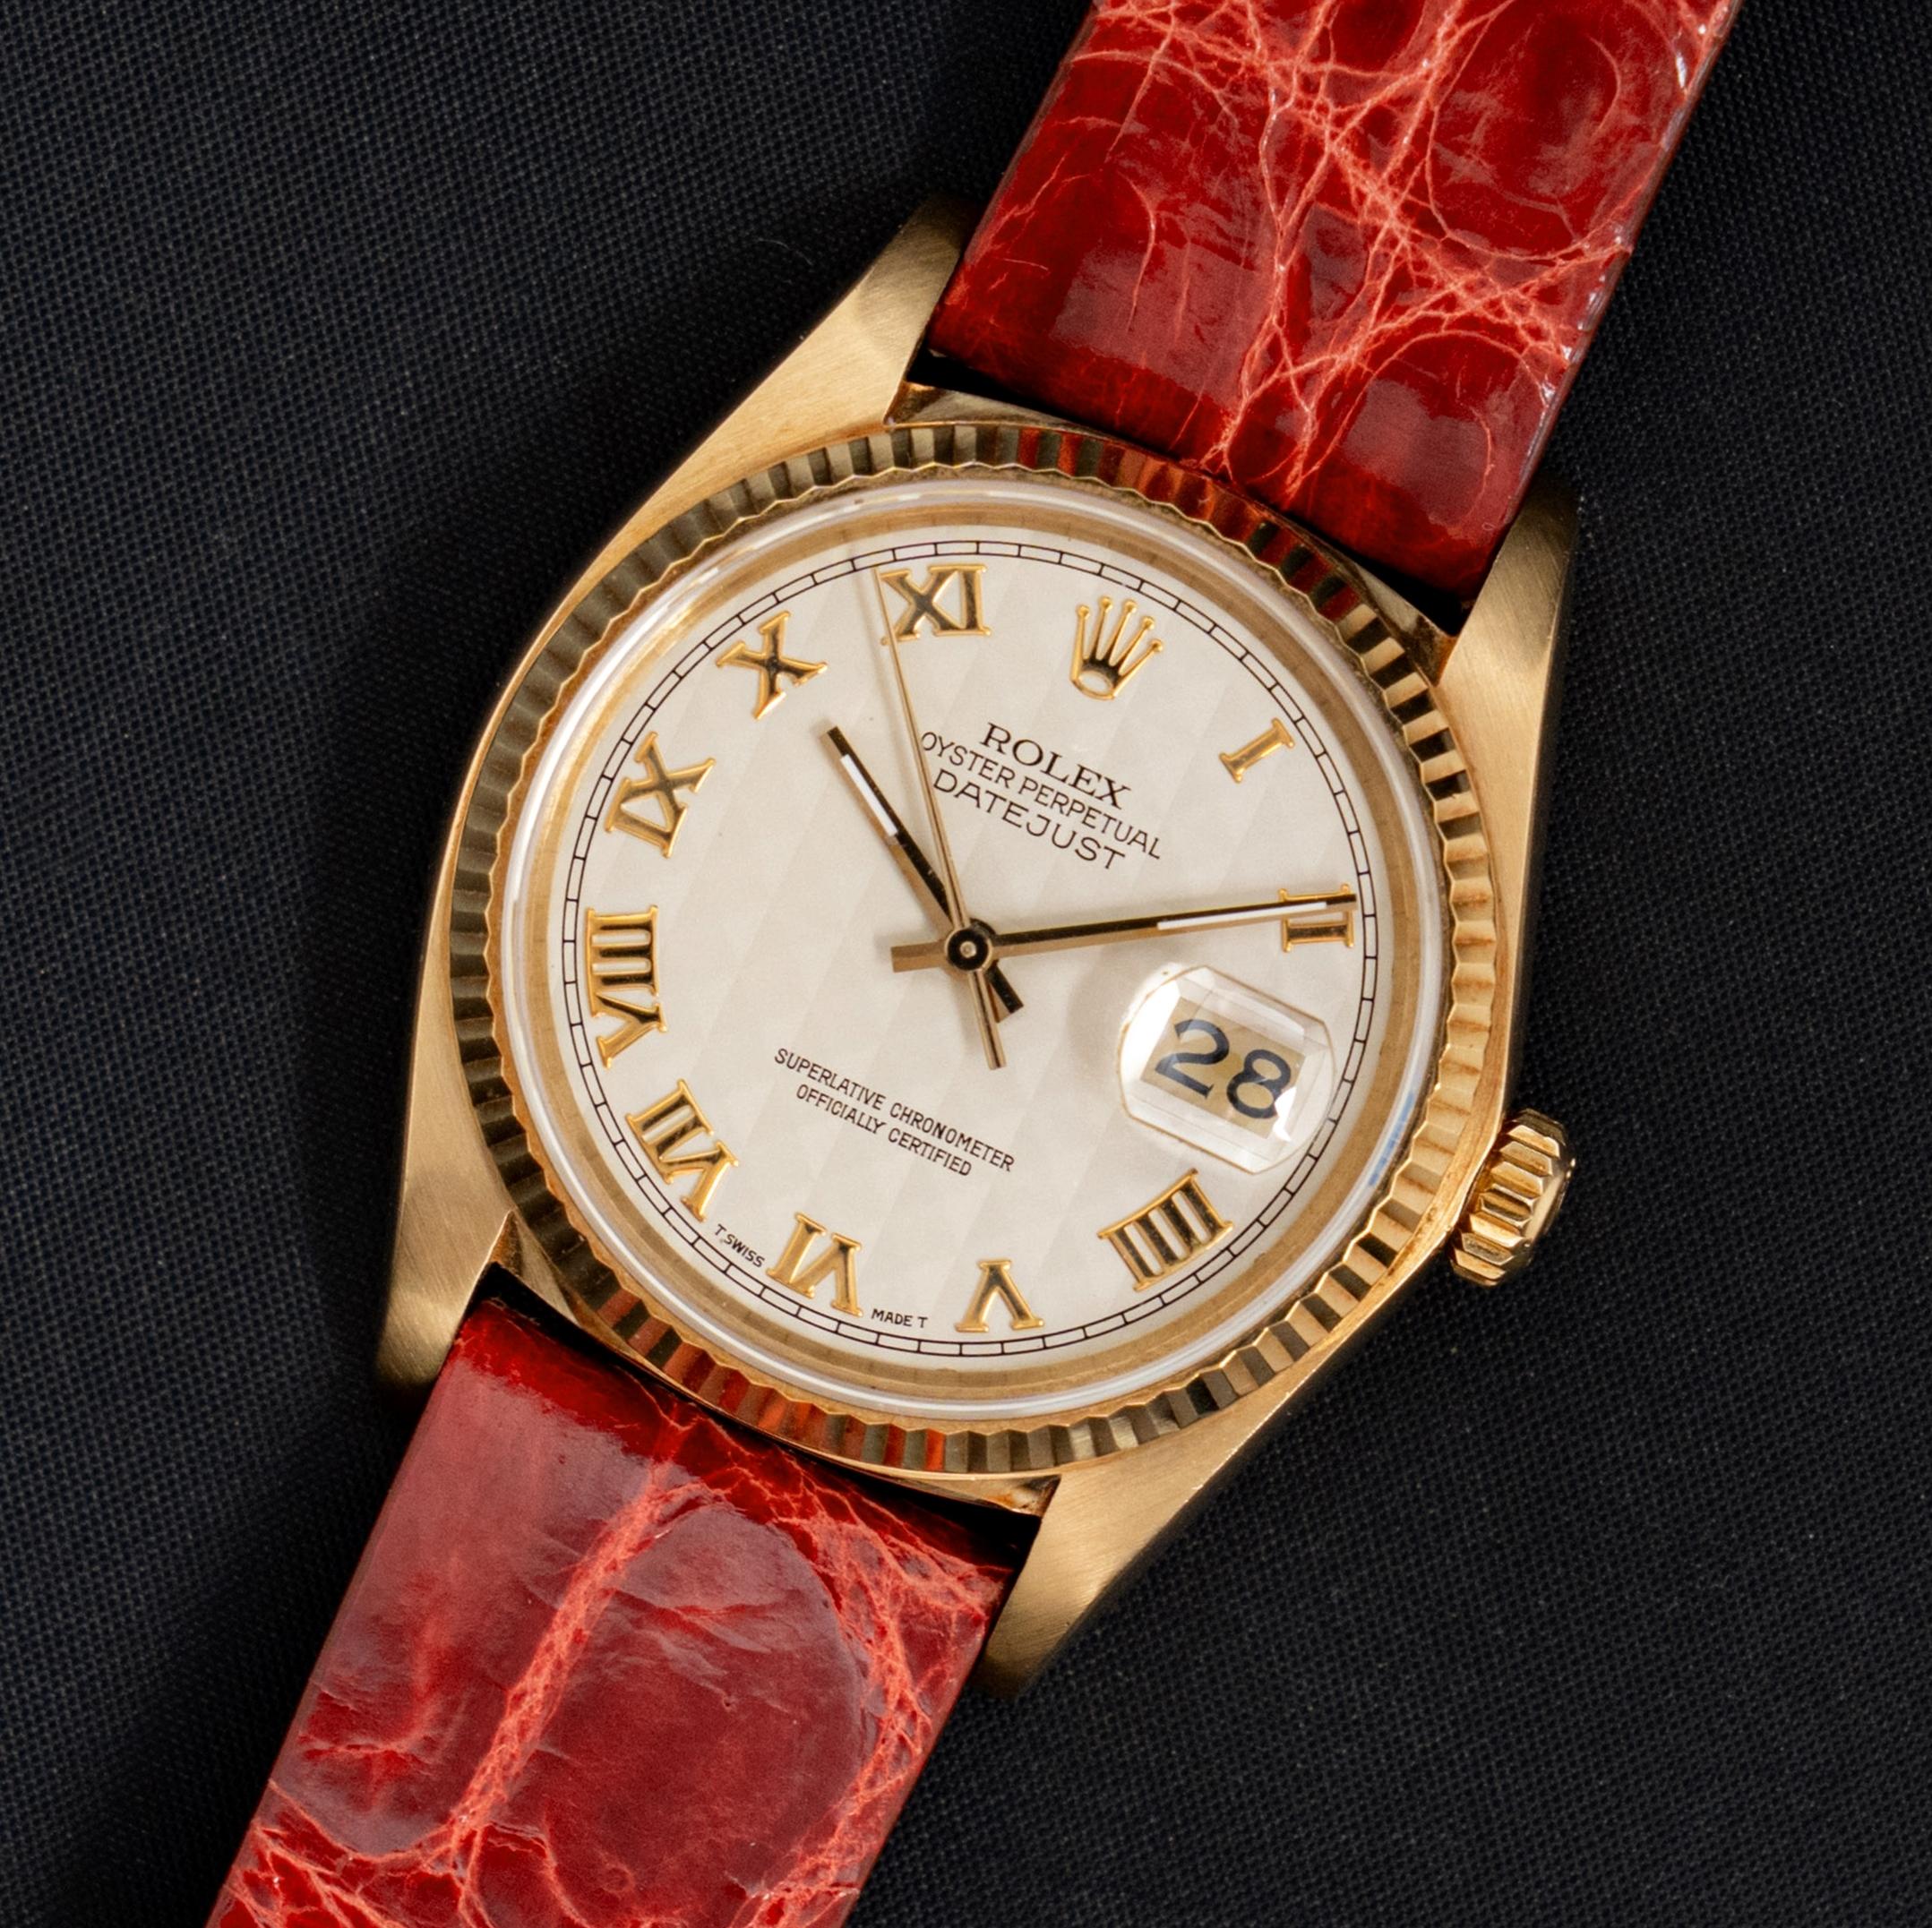 Brand: Vintage Rolex
Model: 16018
Year: 1978
Serial number: 58xxxxx
Reference: C03900

Case: 18K Yellow Gold 36mm in diameter without crown; Show sign of wear with slight polish from previous; inner case back stamped 16000

Dial: Excellent condition